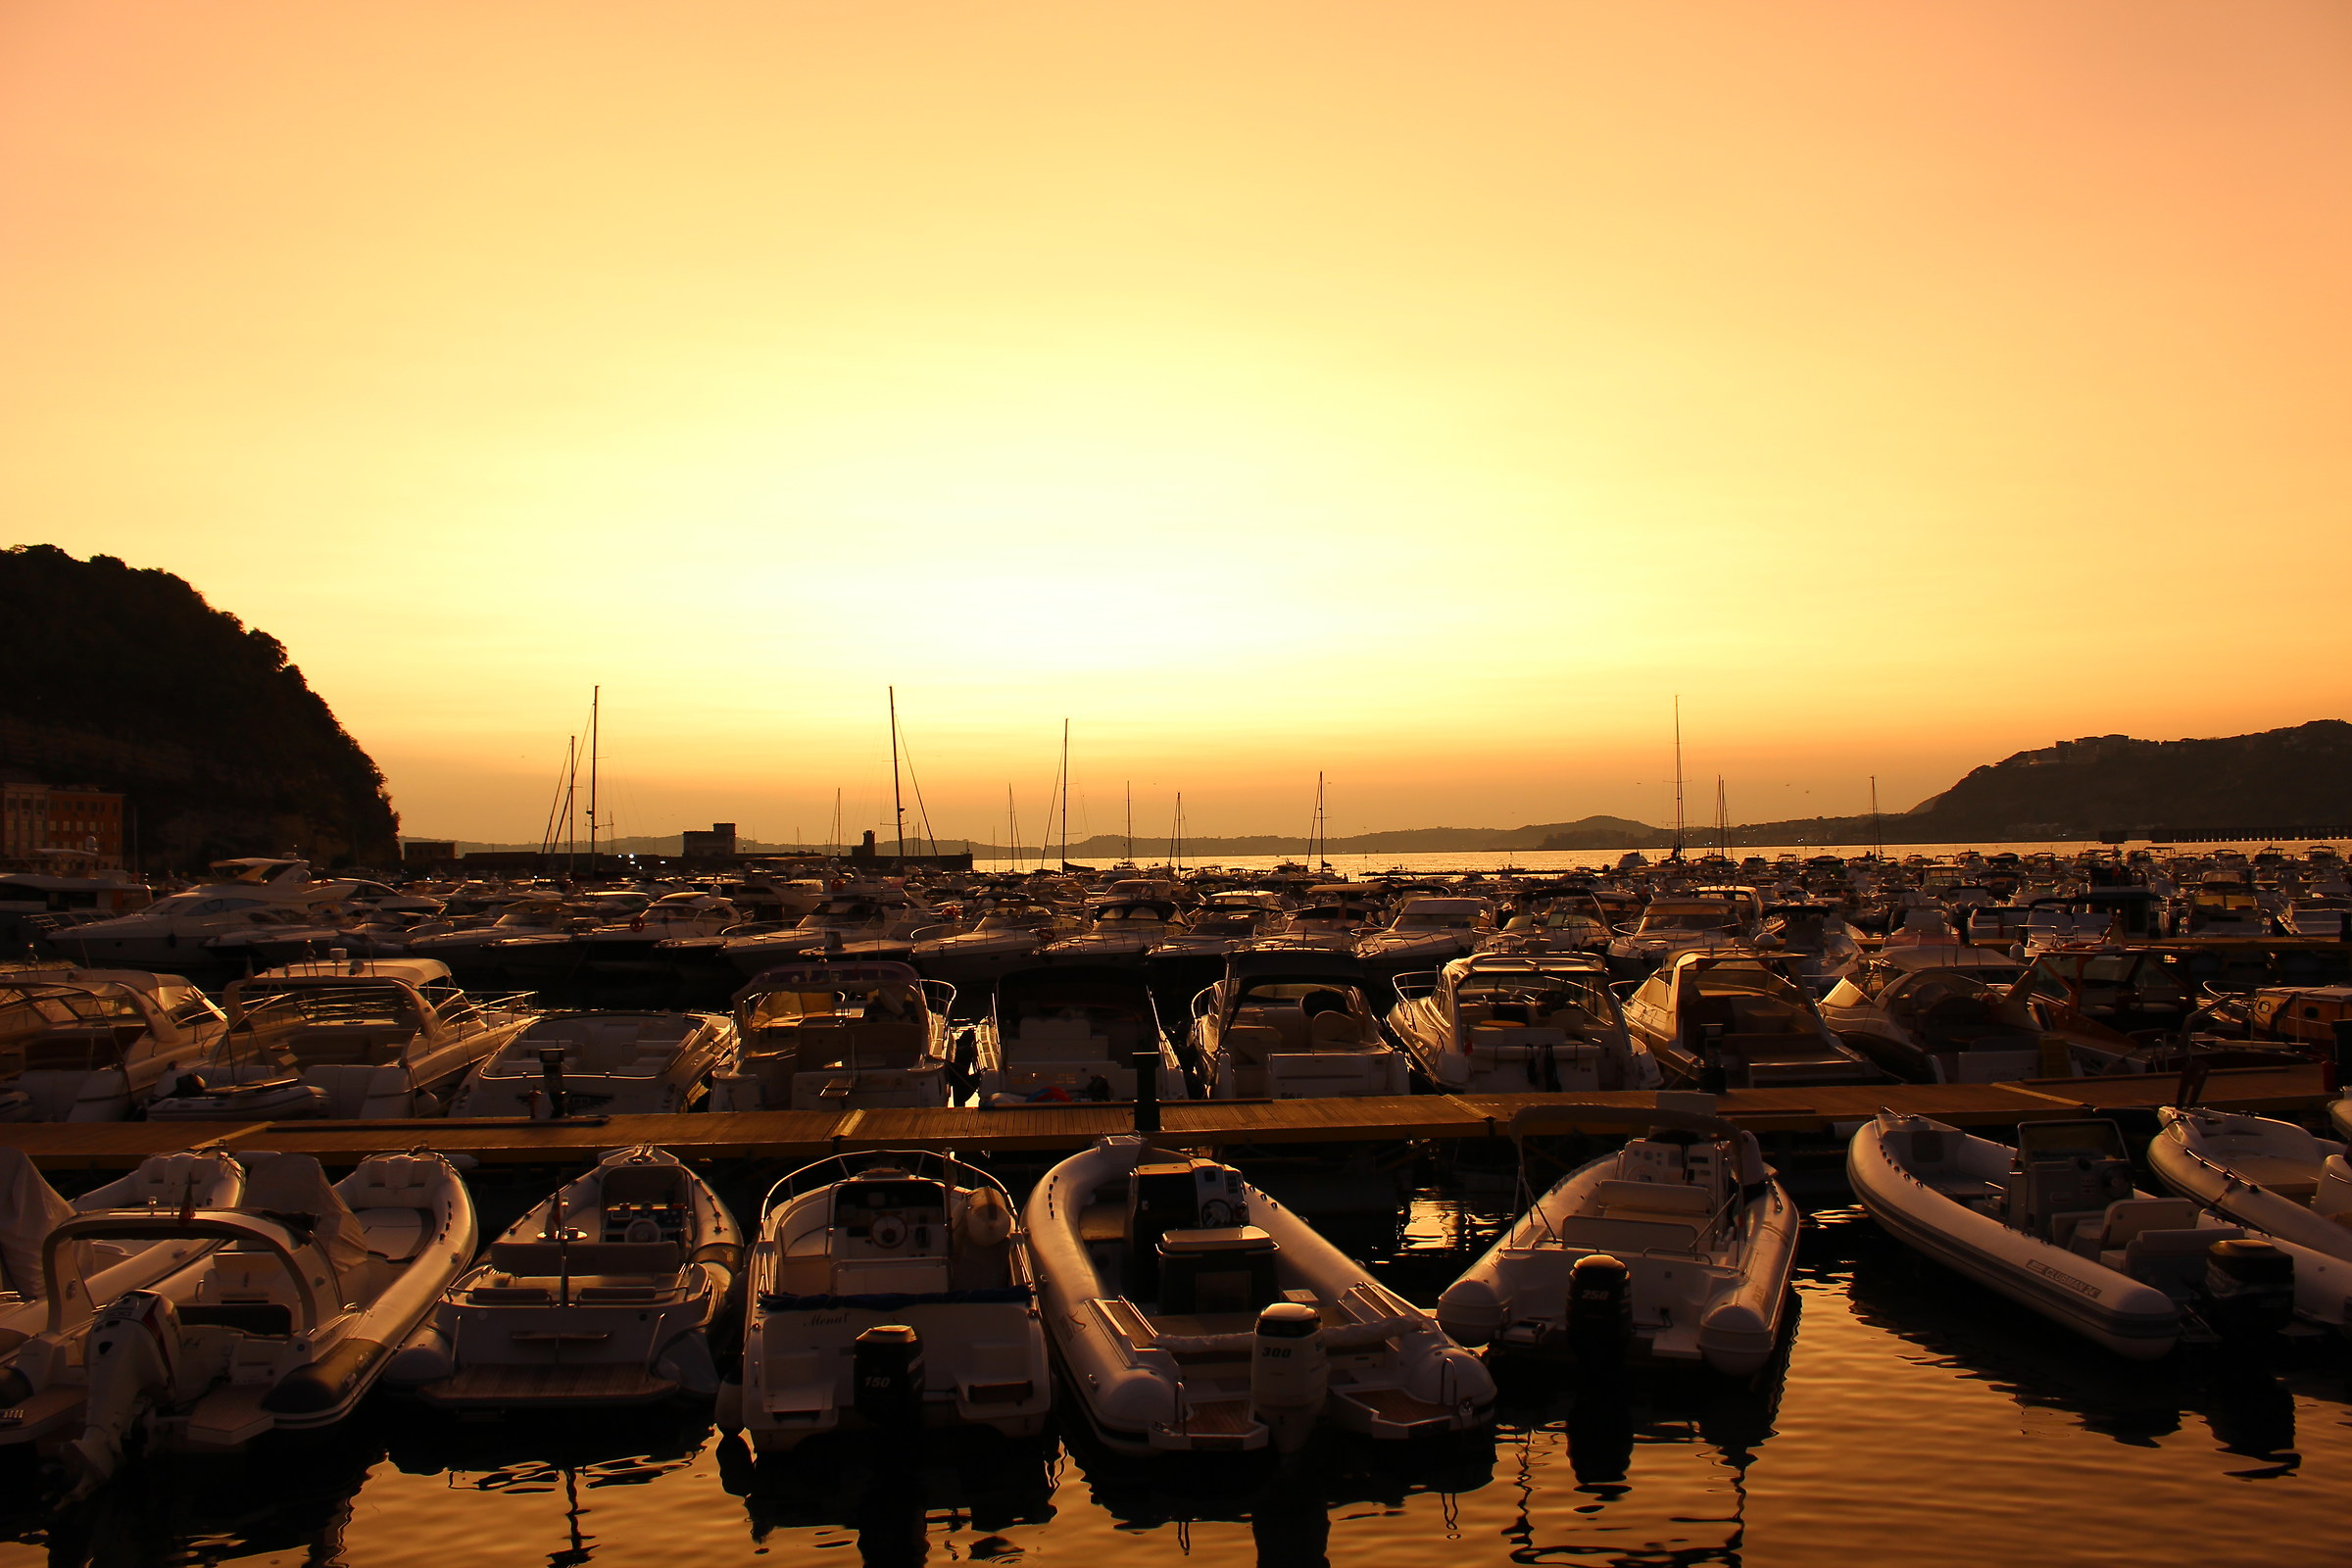 The boats at sunset...